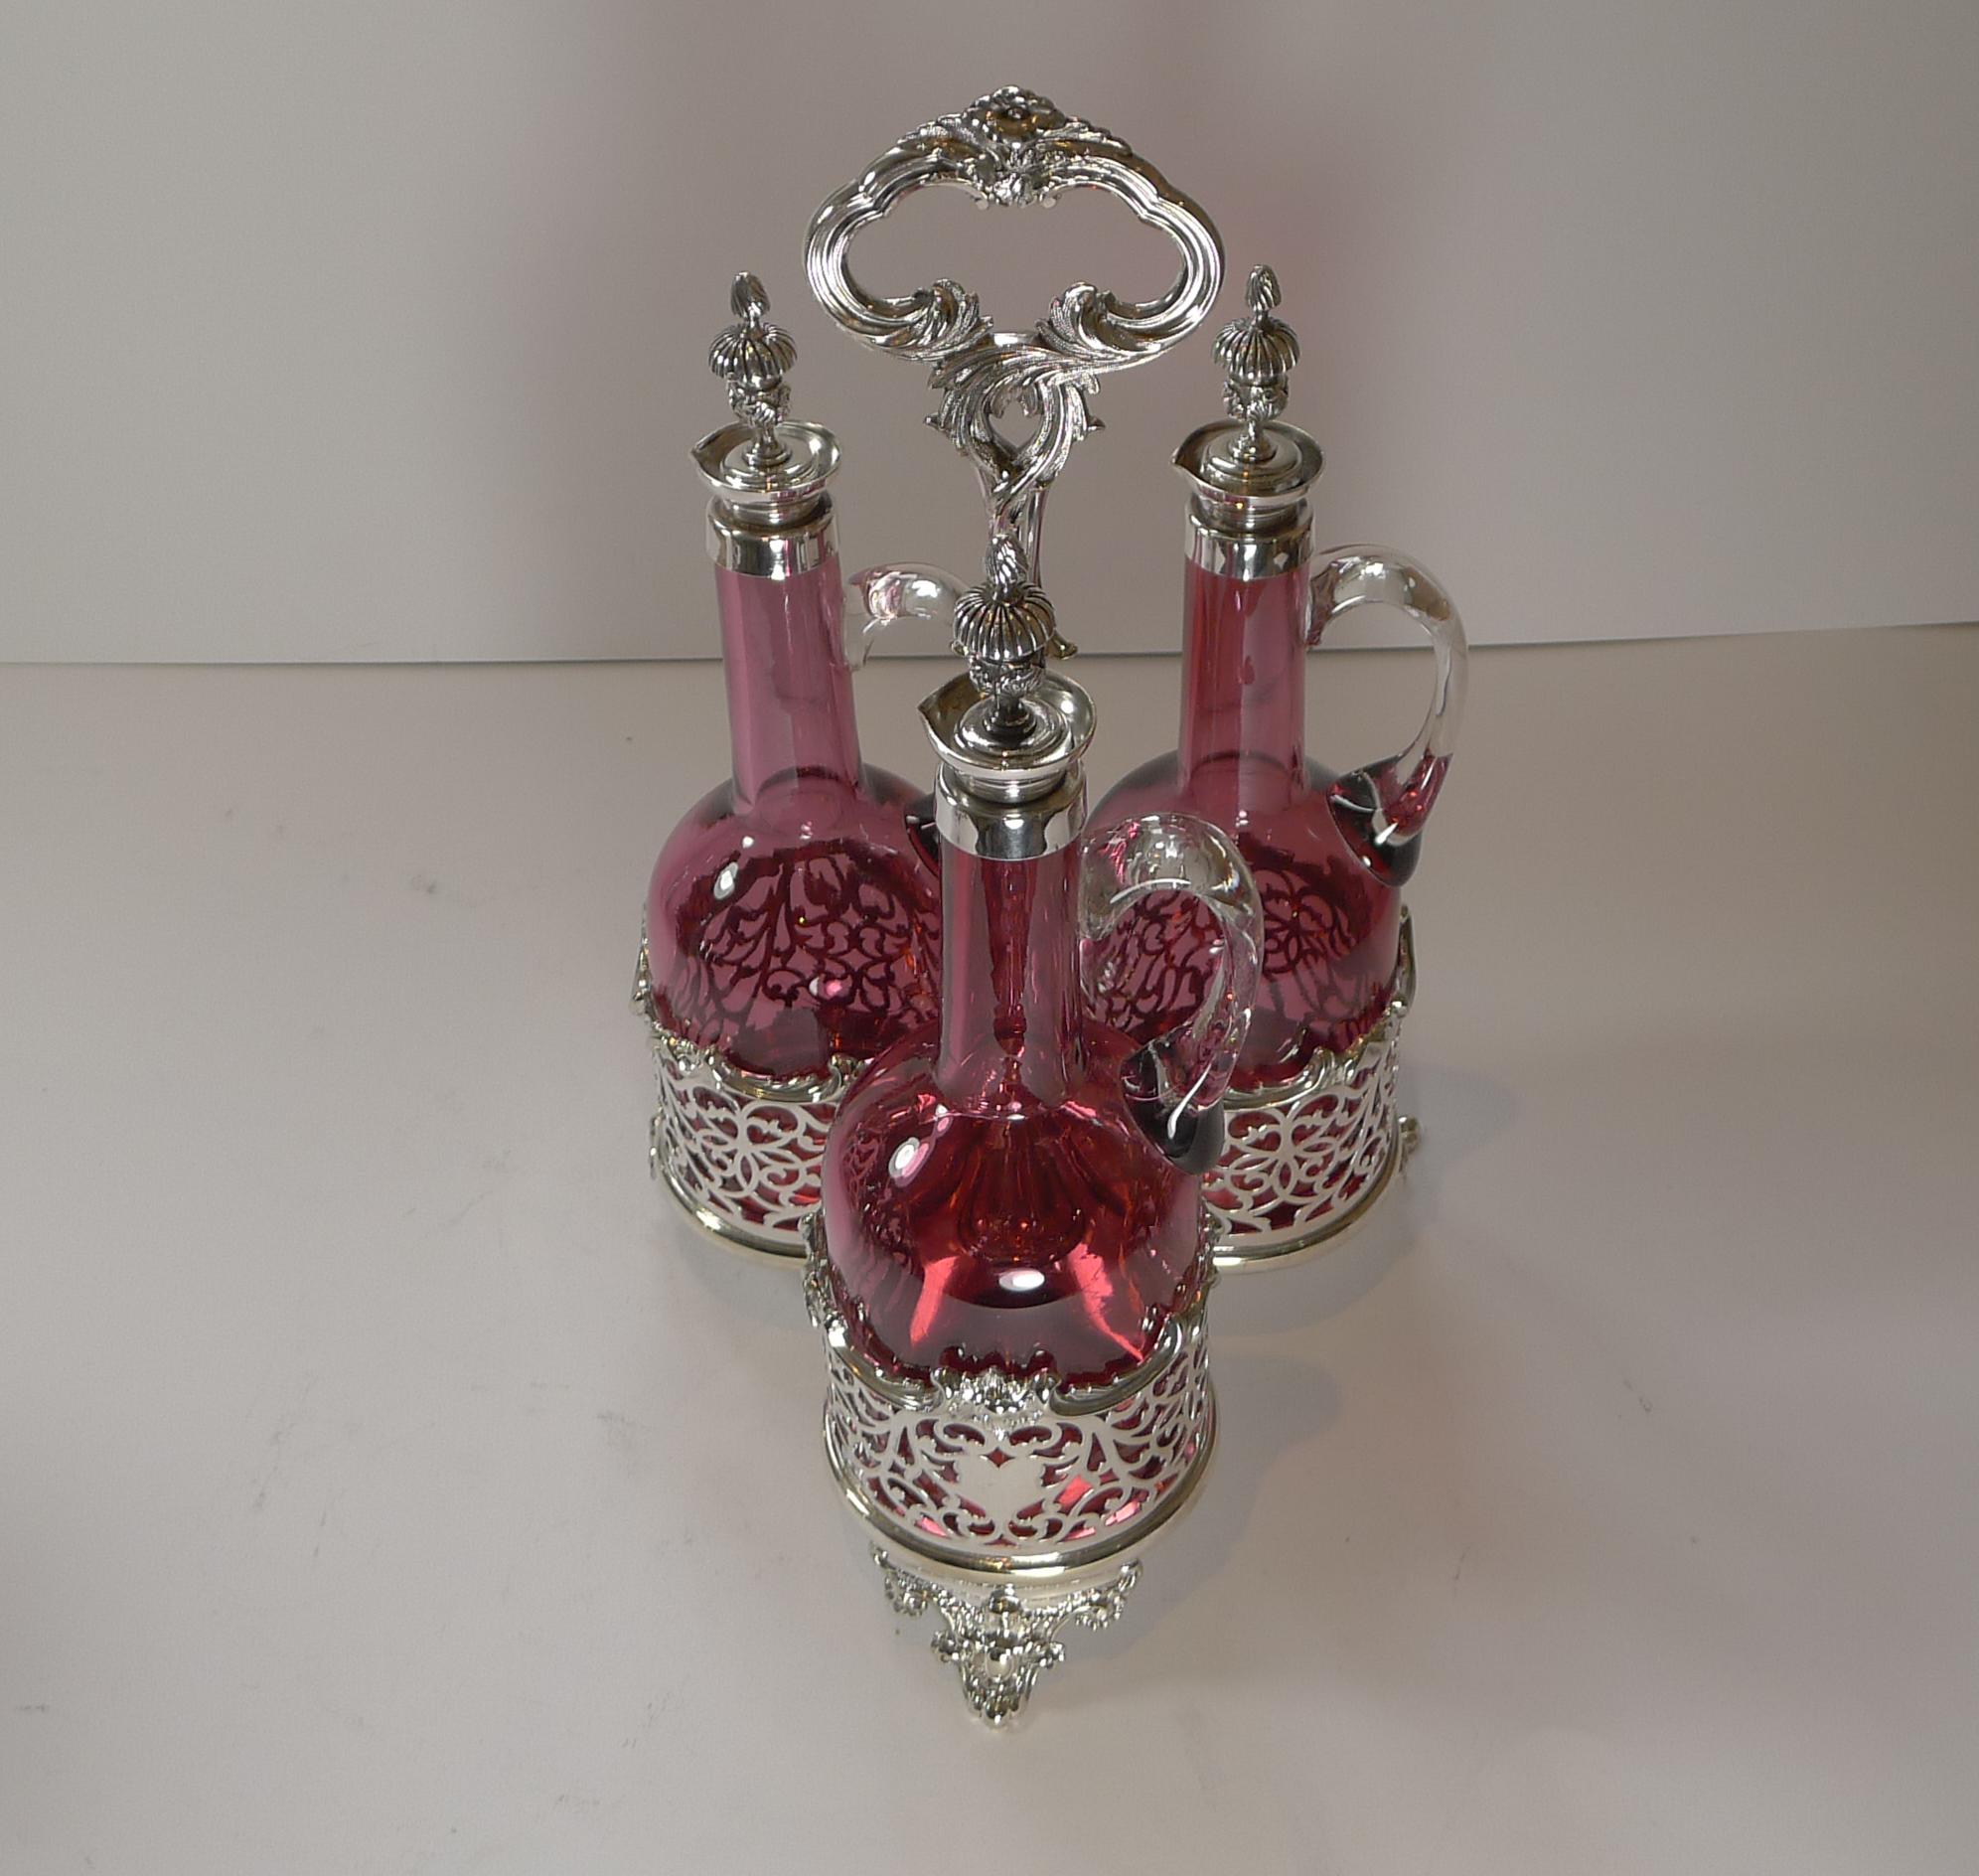 Stunning Cranberry Glass and Silver Plate Decanter Set c.1890 For Sale 6